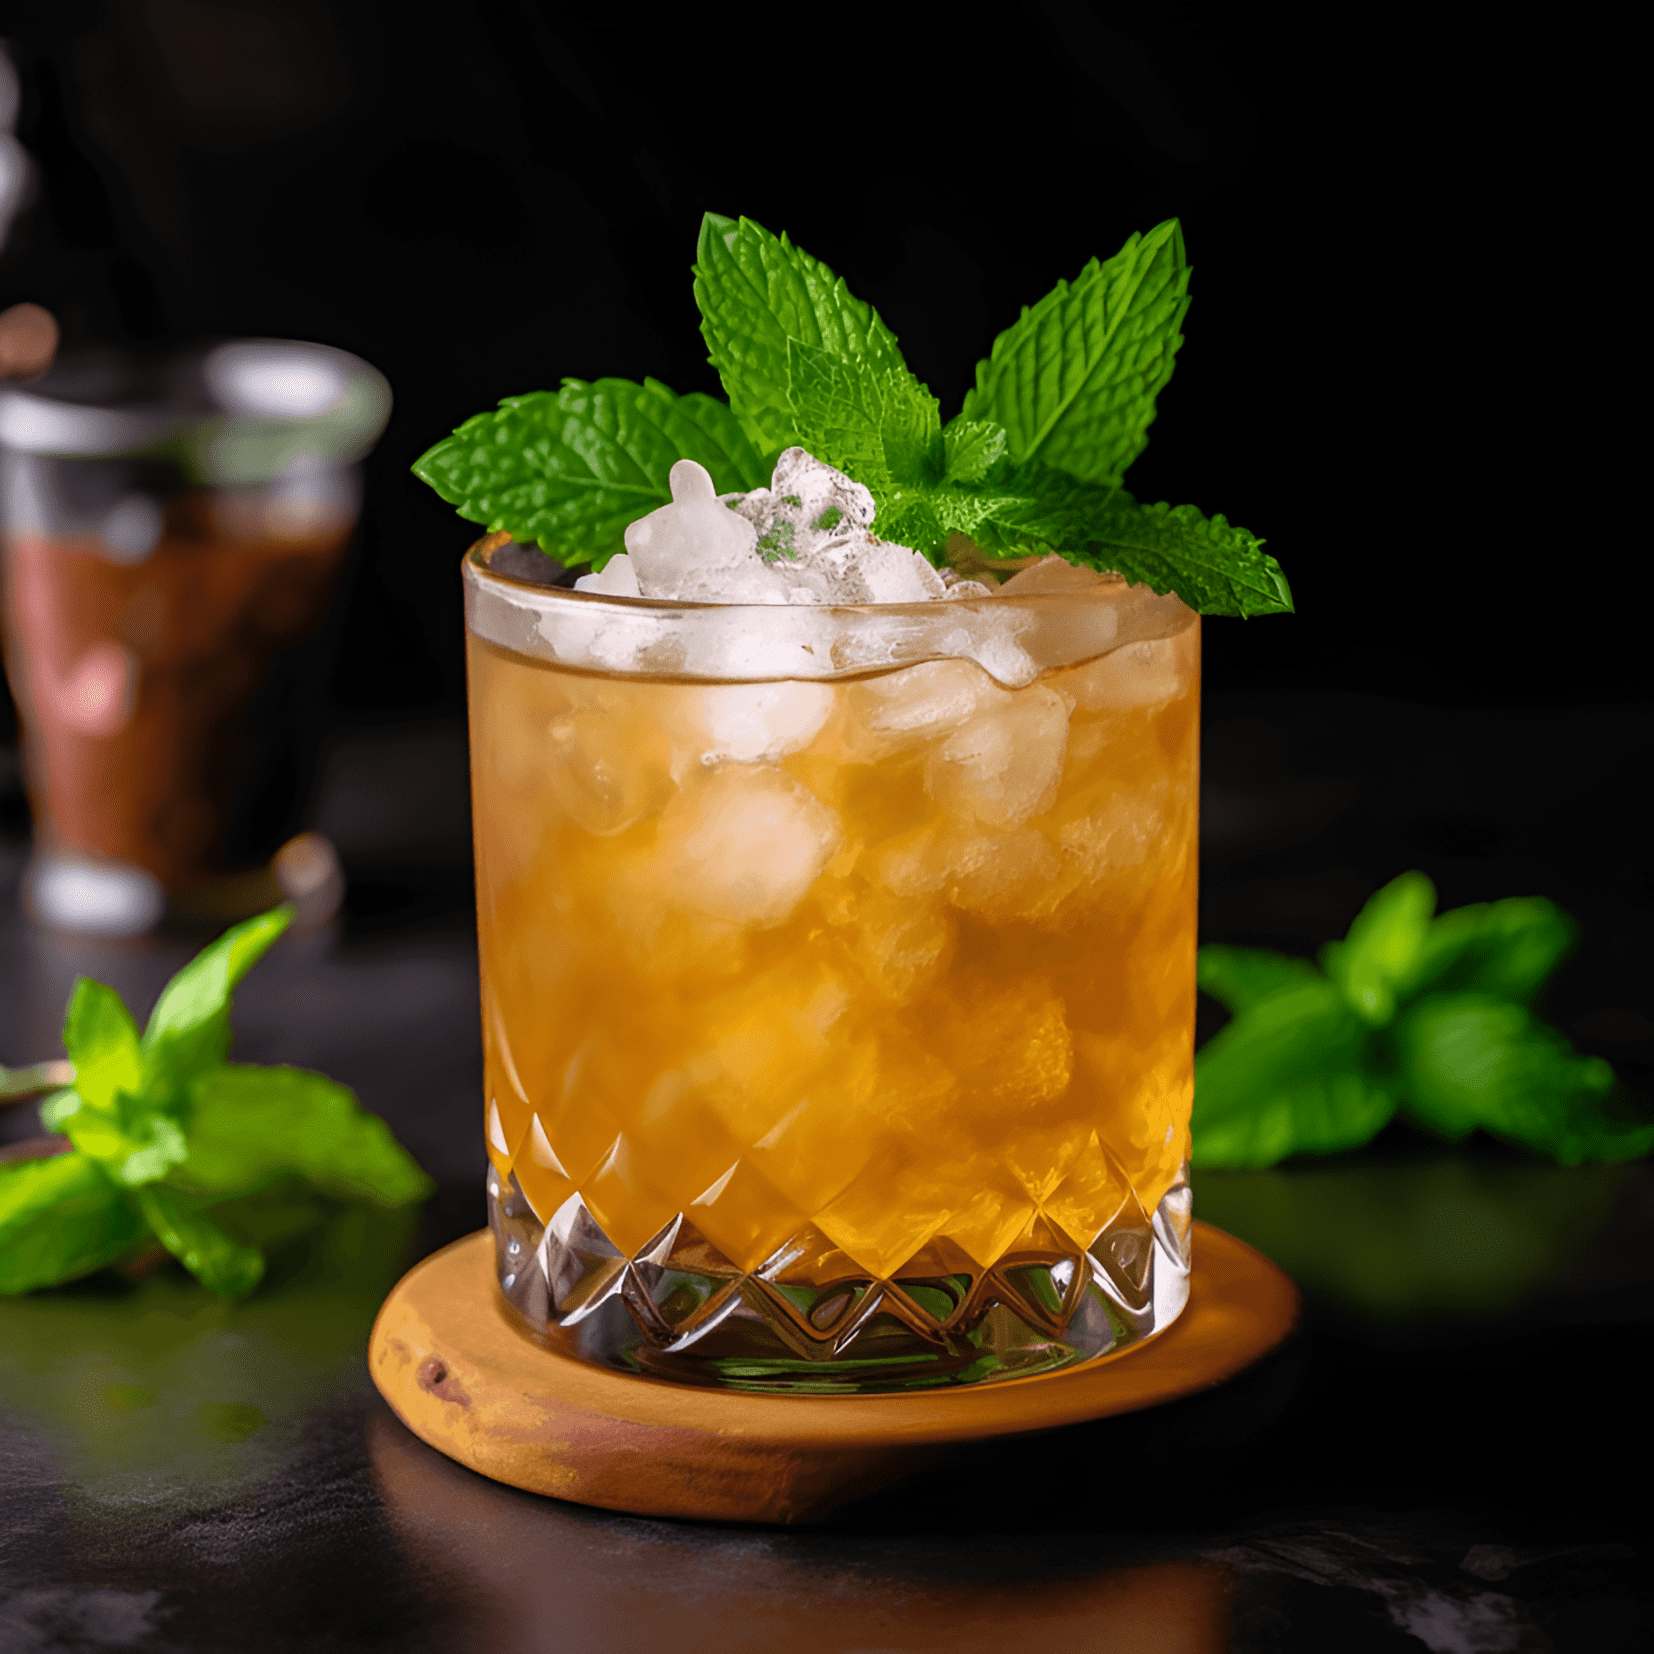 Jet Pilot Cocktail Recipe - The Jet Pilot cocktail is a complex, flavorful drink with a perfect balance of sweet, sour, and spicy notes. It has a strong, boozy backbone with a hint of fruity sweetness, followed by a tangy citrus kick and a touch of warm, spiced undertones.